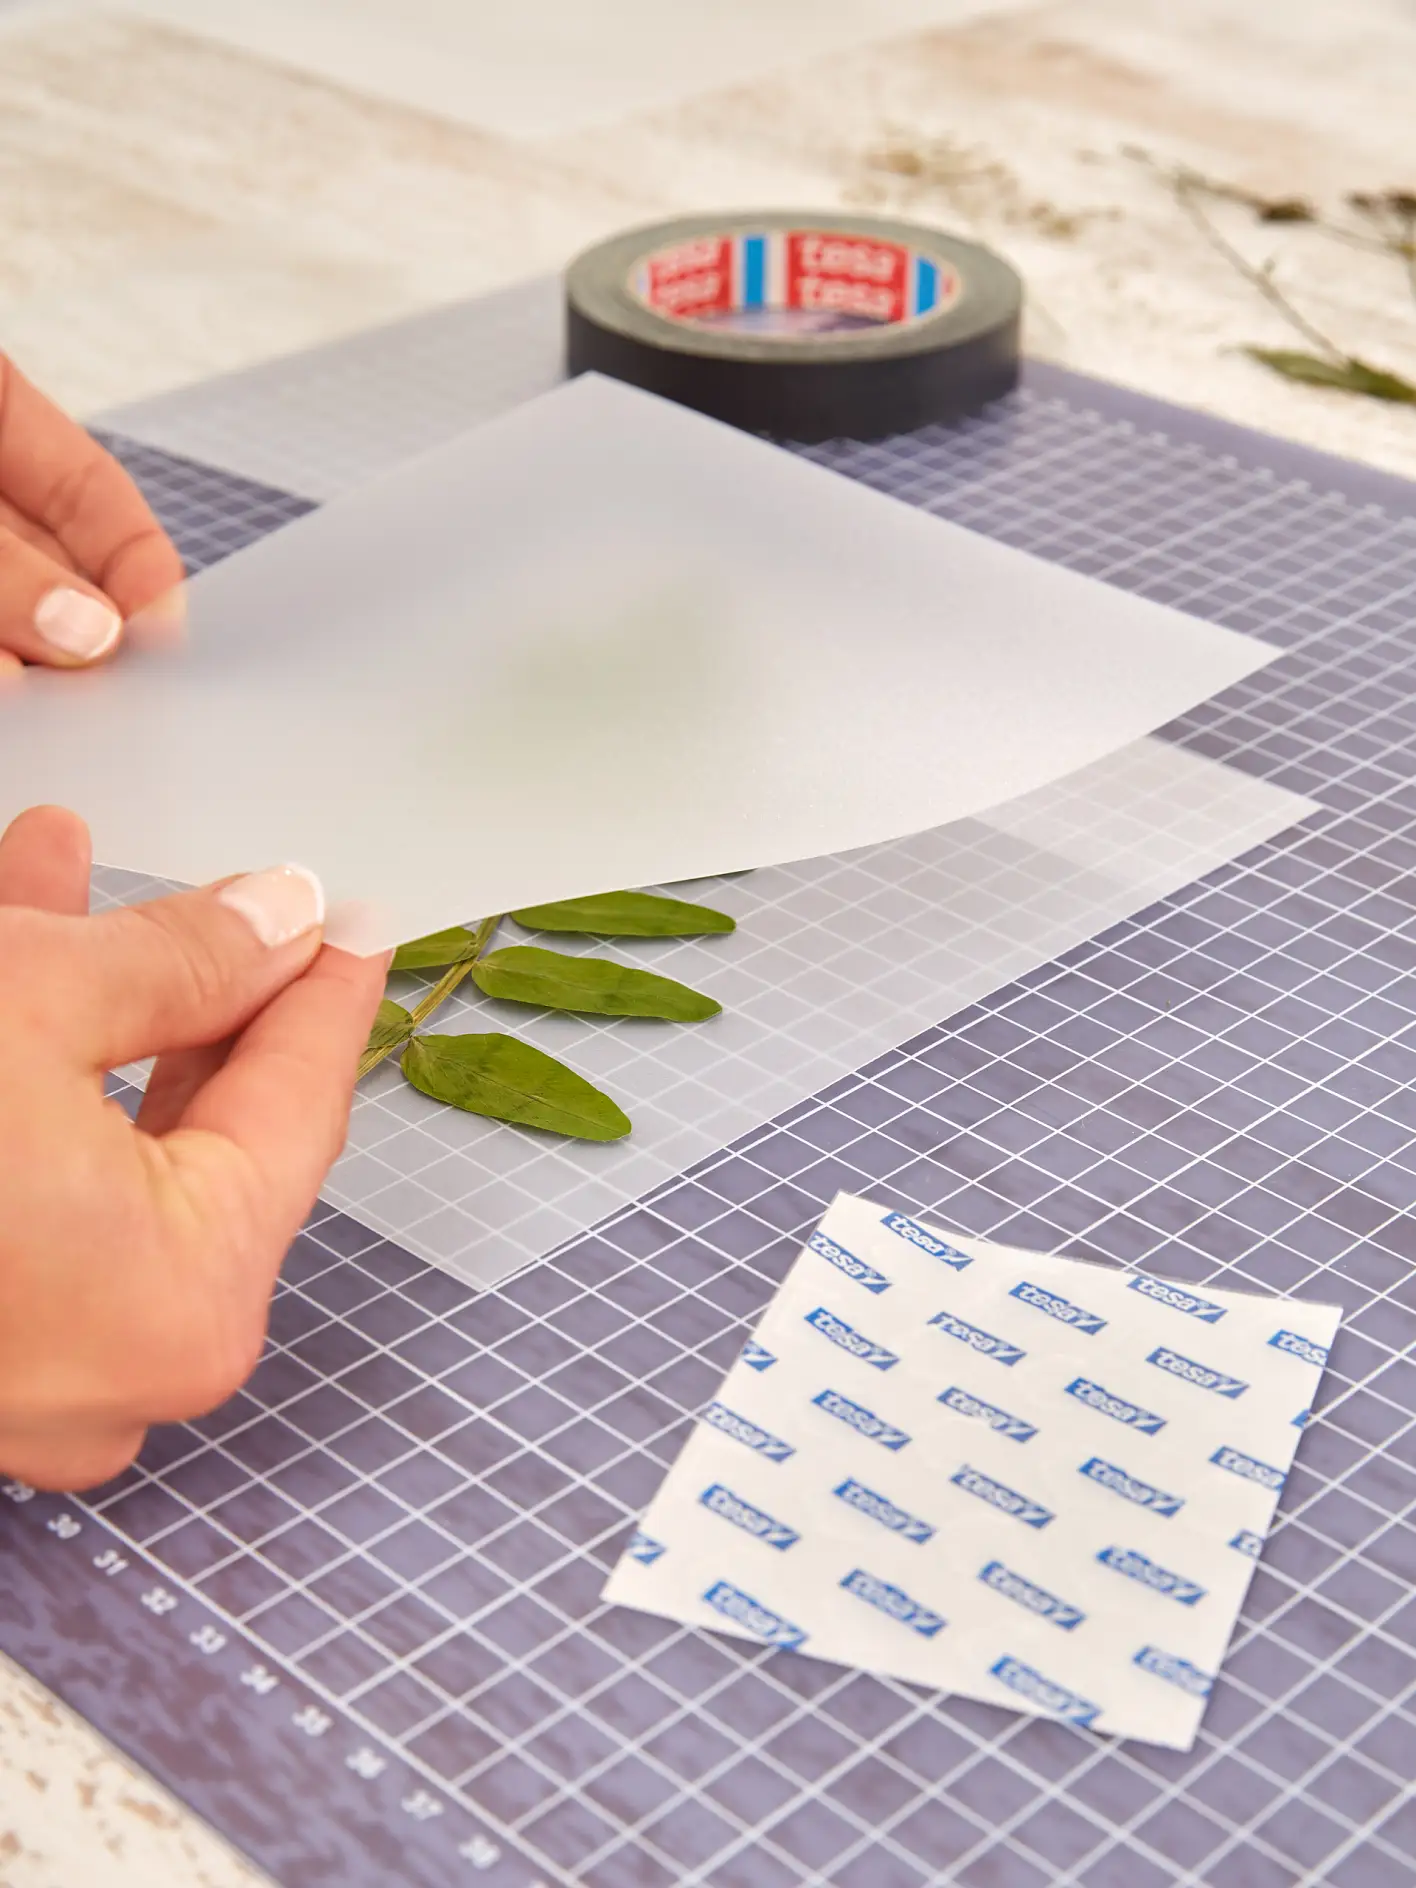 Placing clear sheets over the pressed leaves